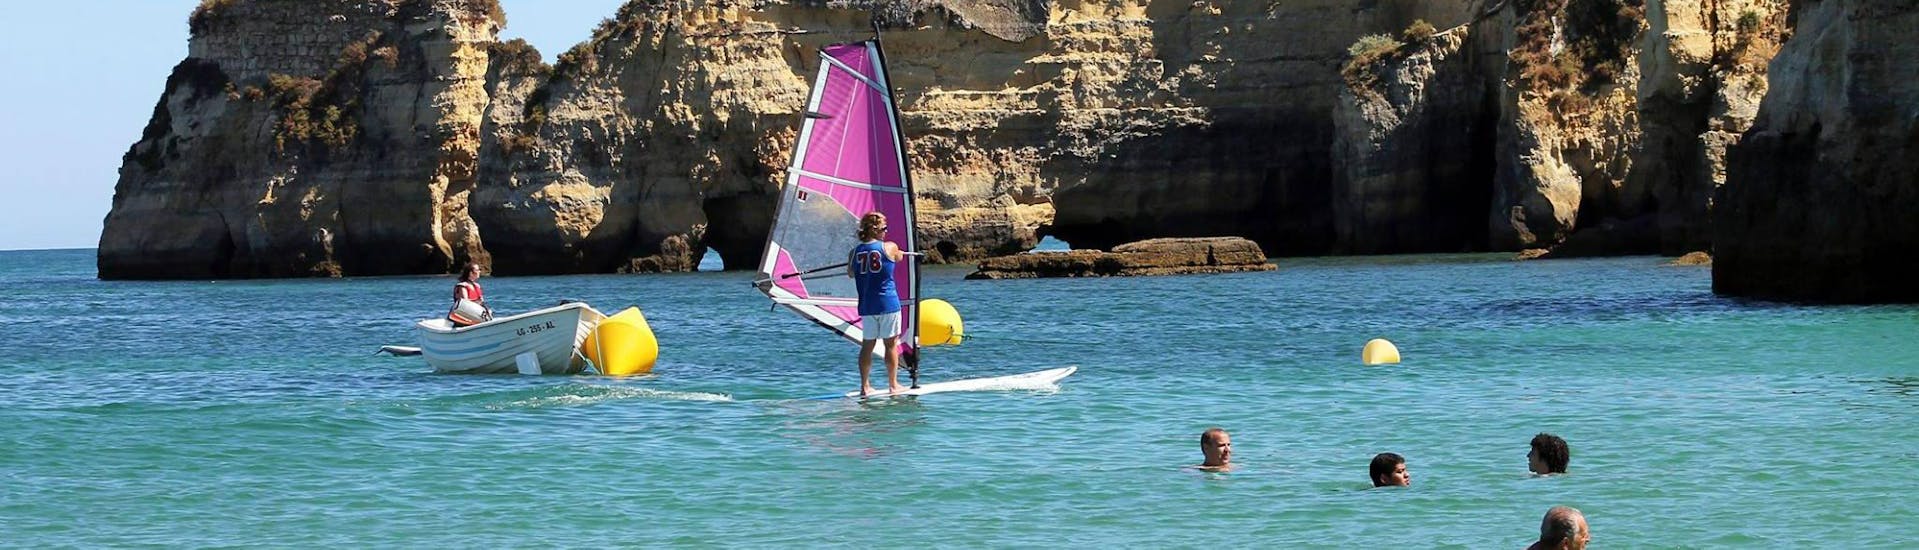 Windsurfing Lessons for Kids & Adults - Beginners.